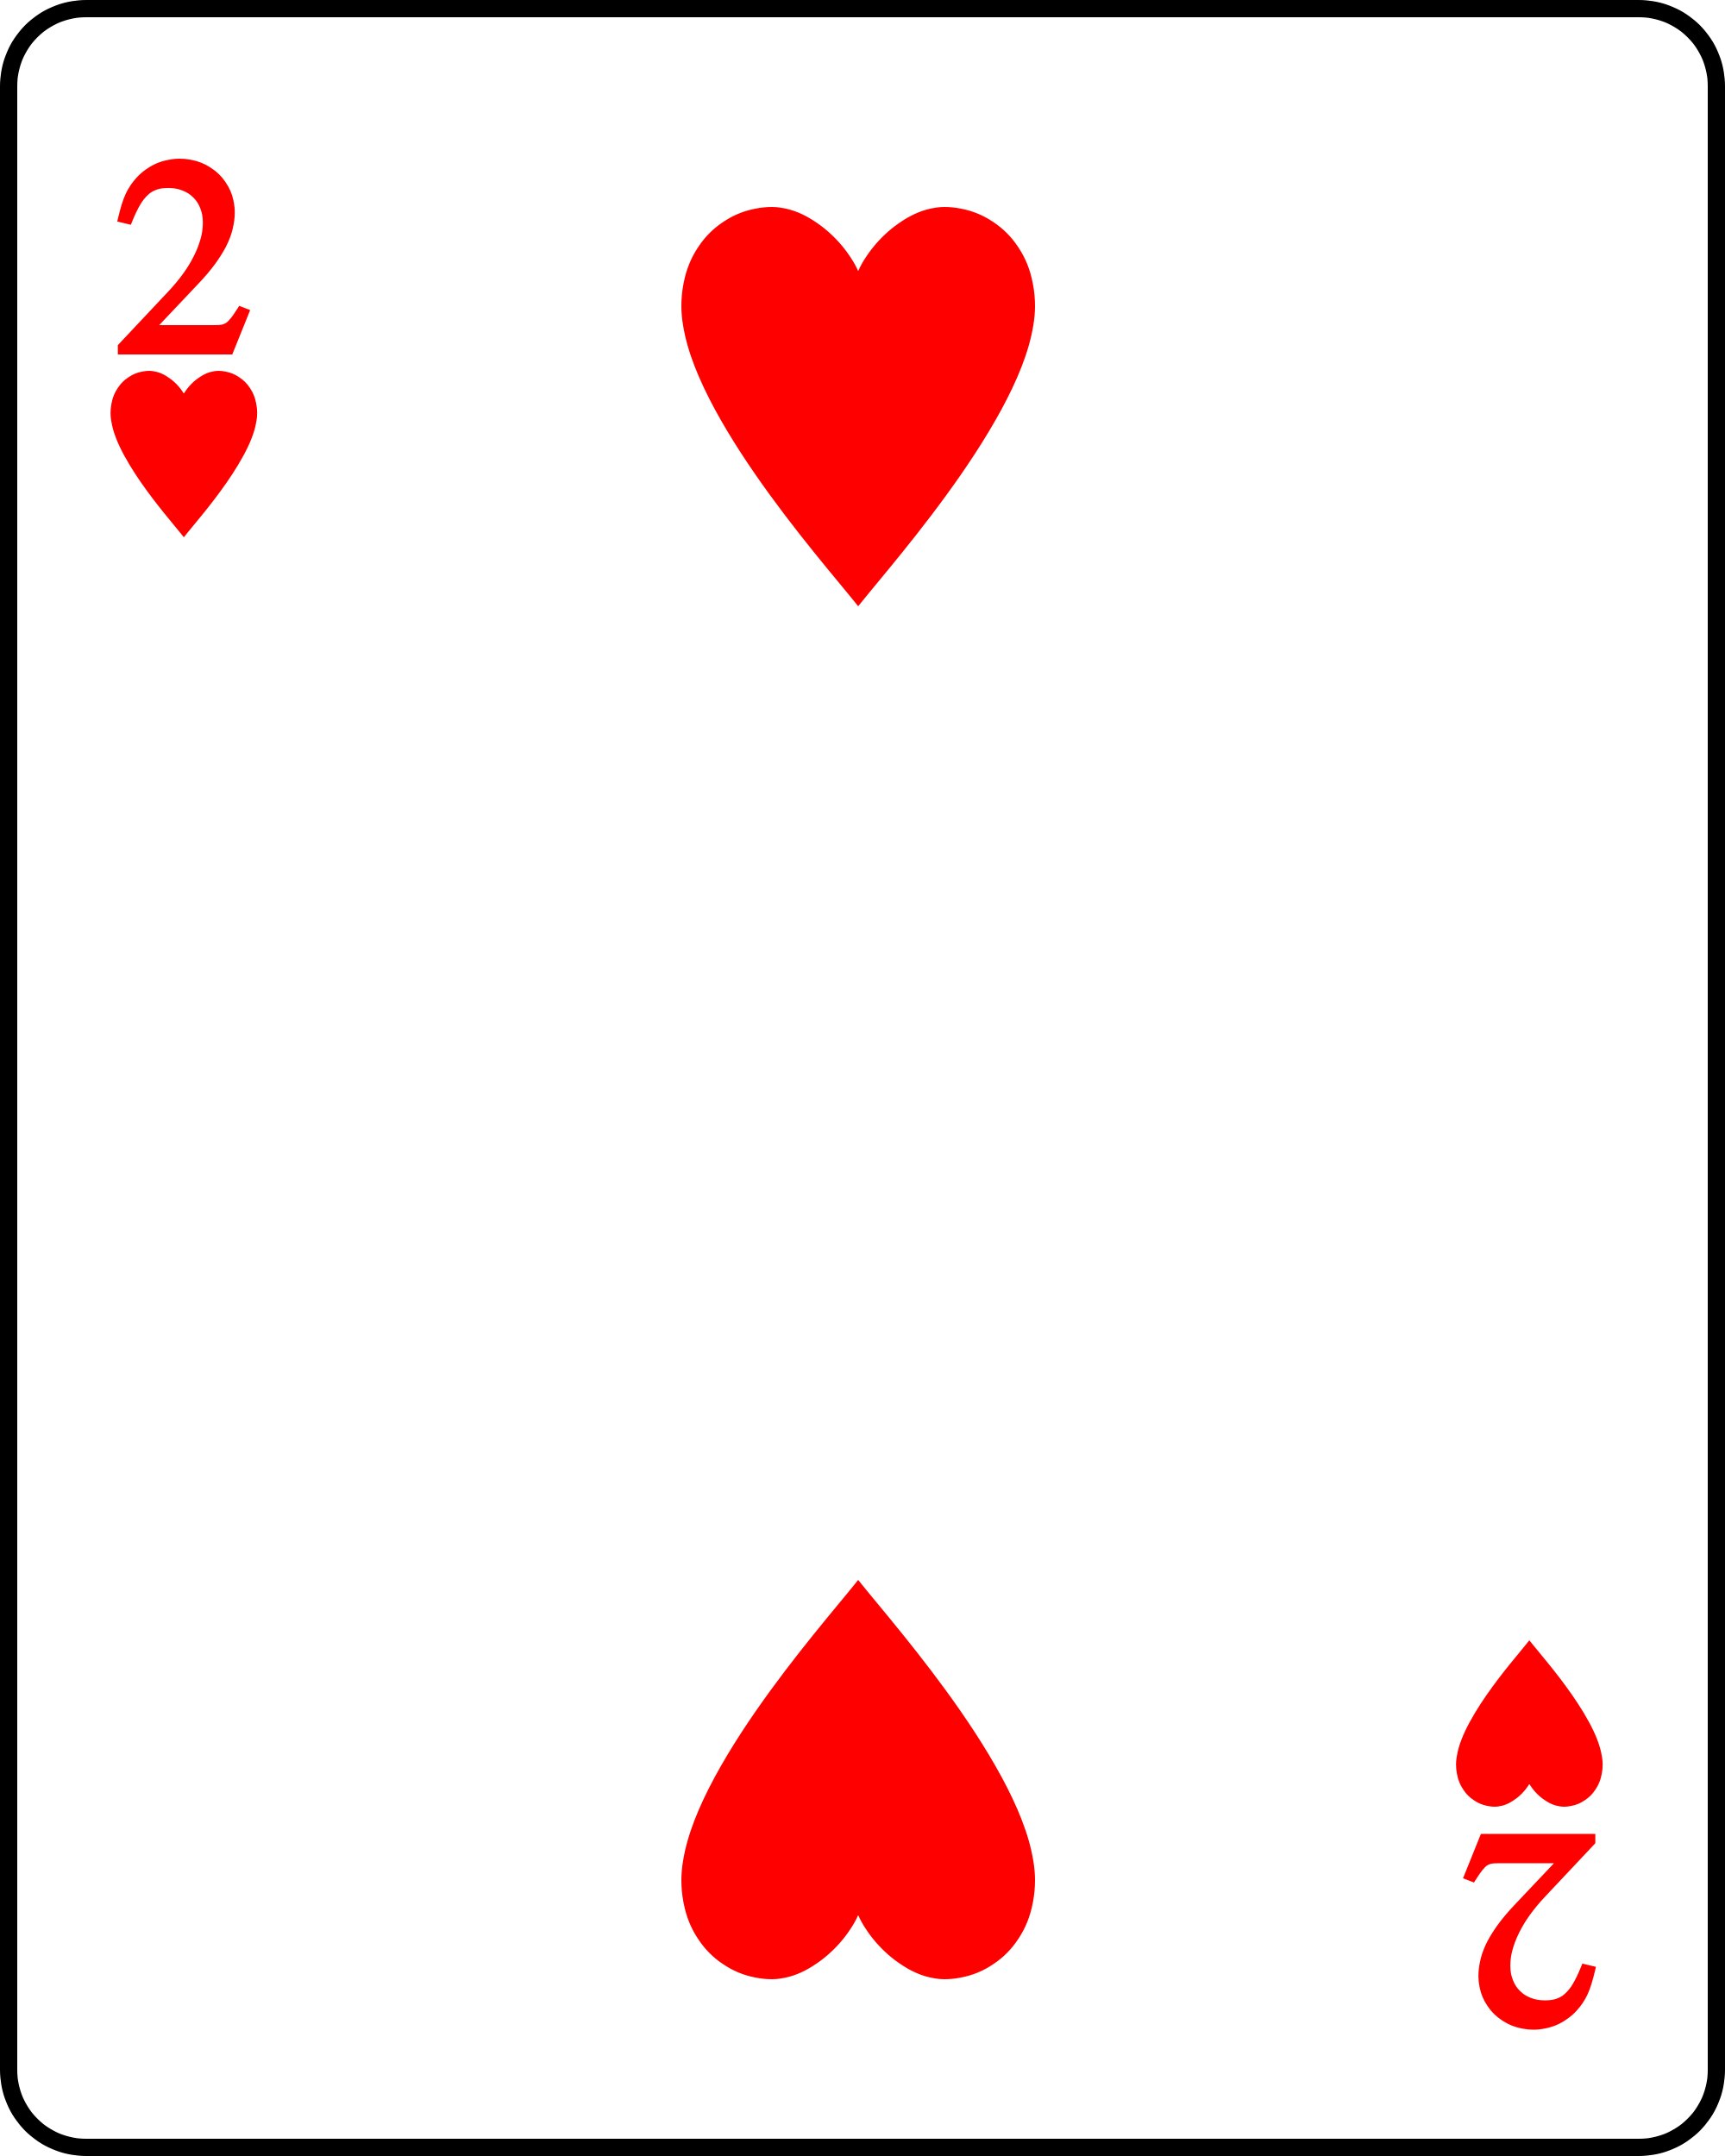 File:Playing card heart 2.svg - Wikimedia Commons